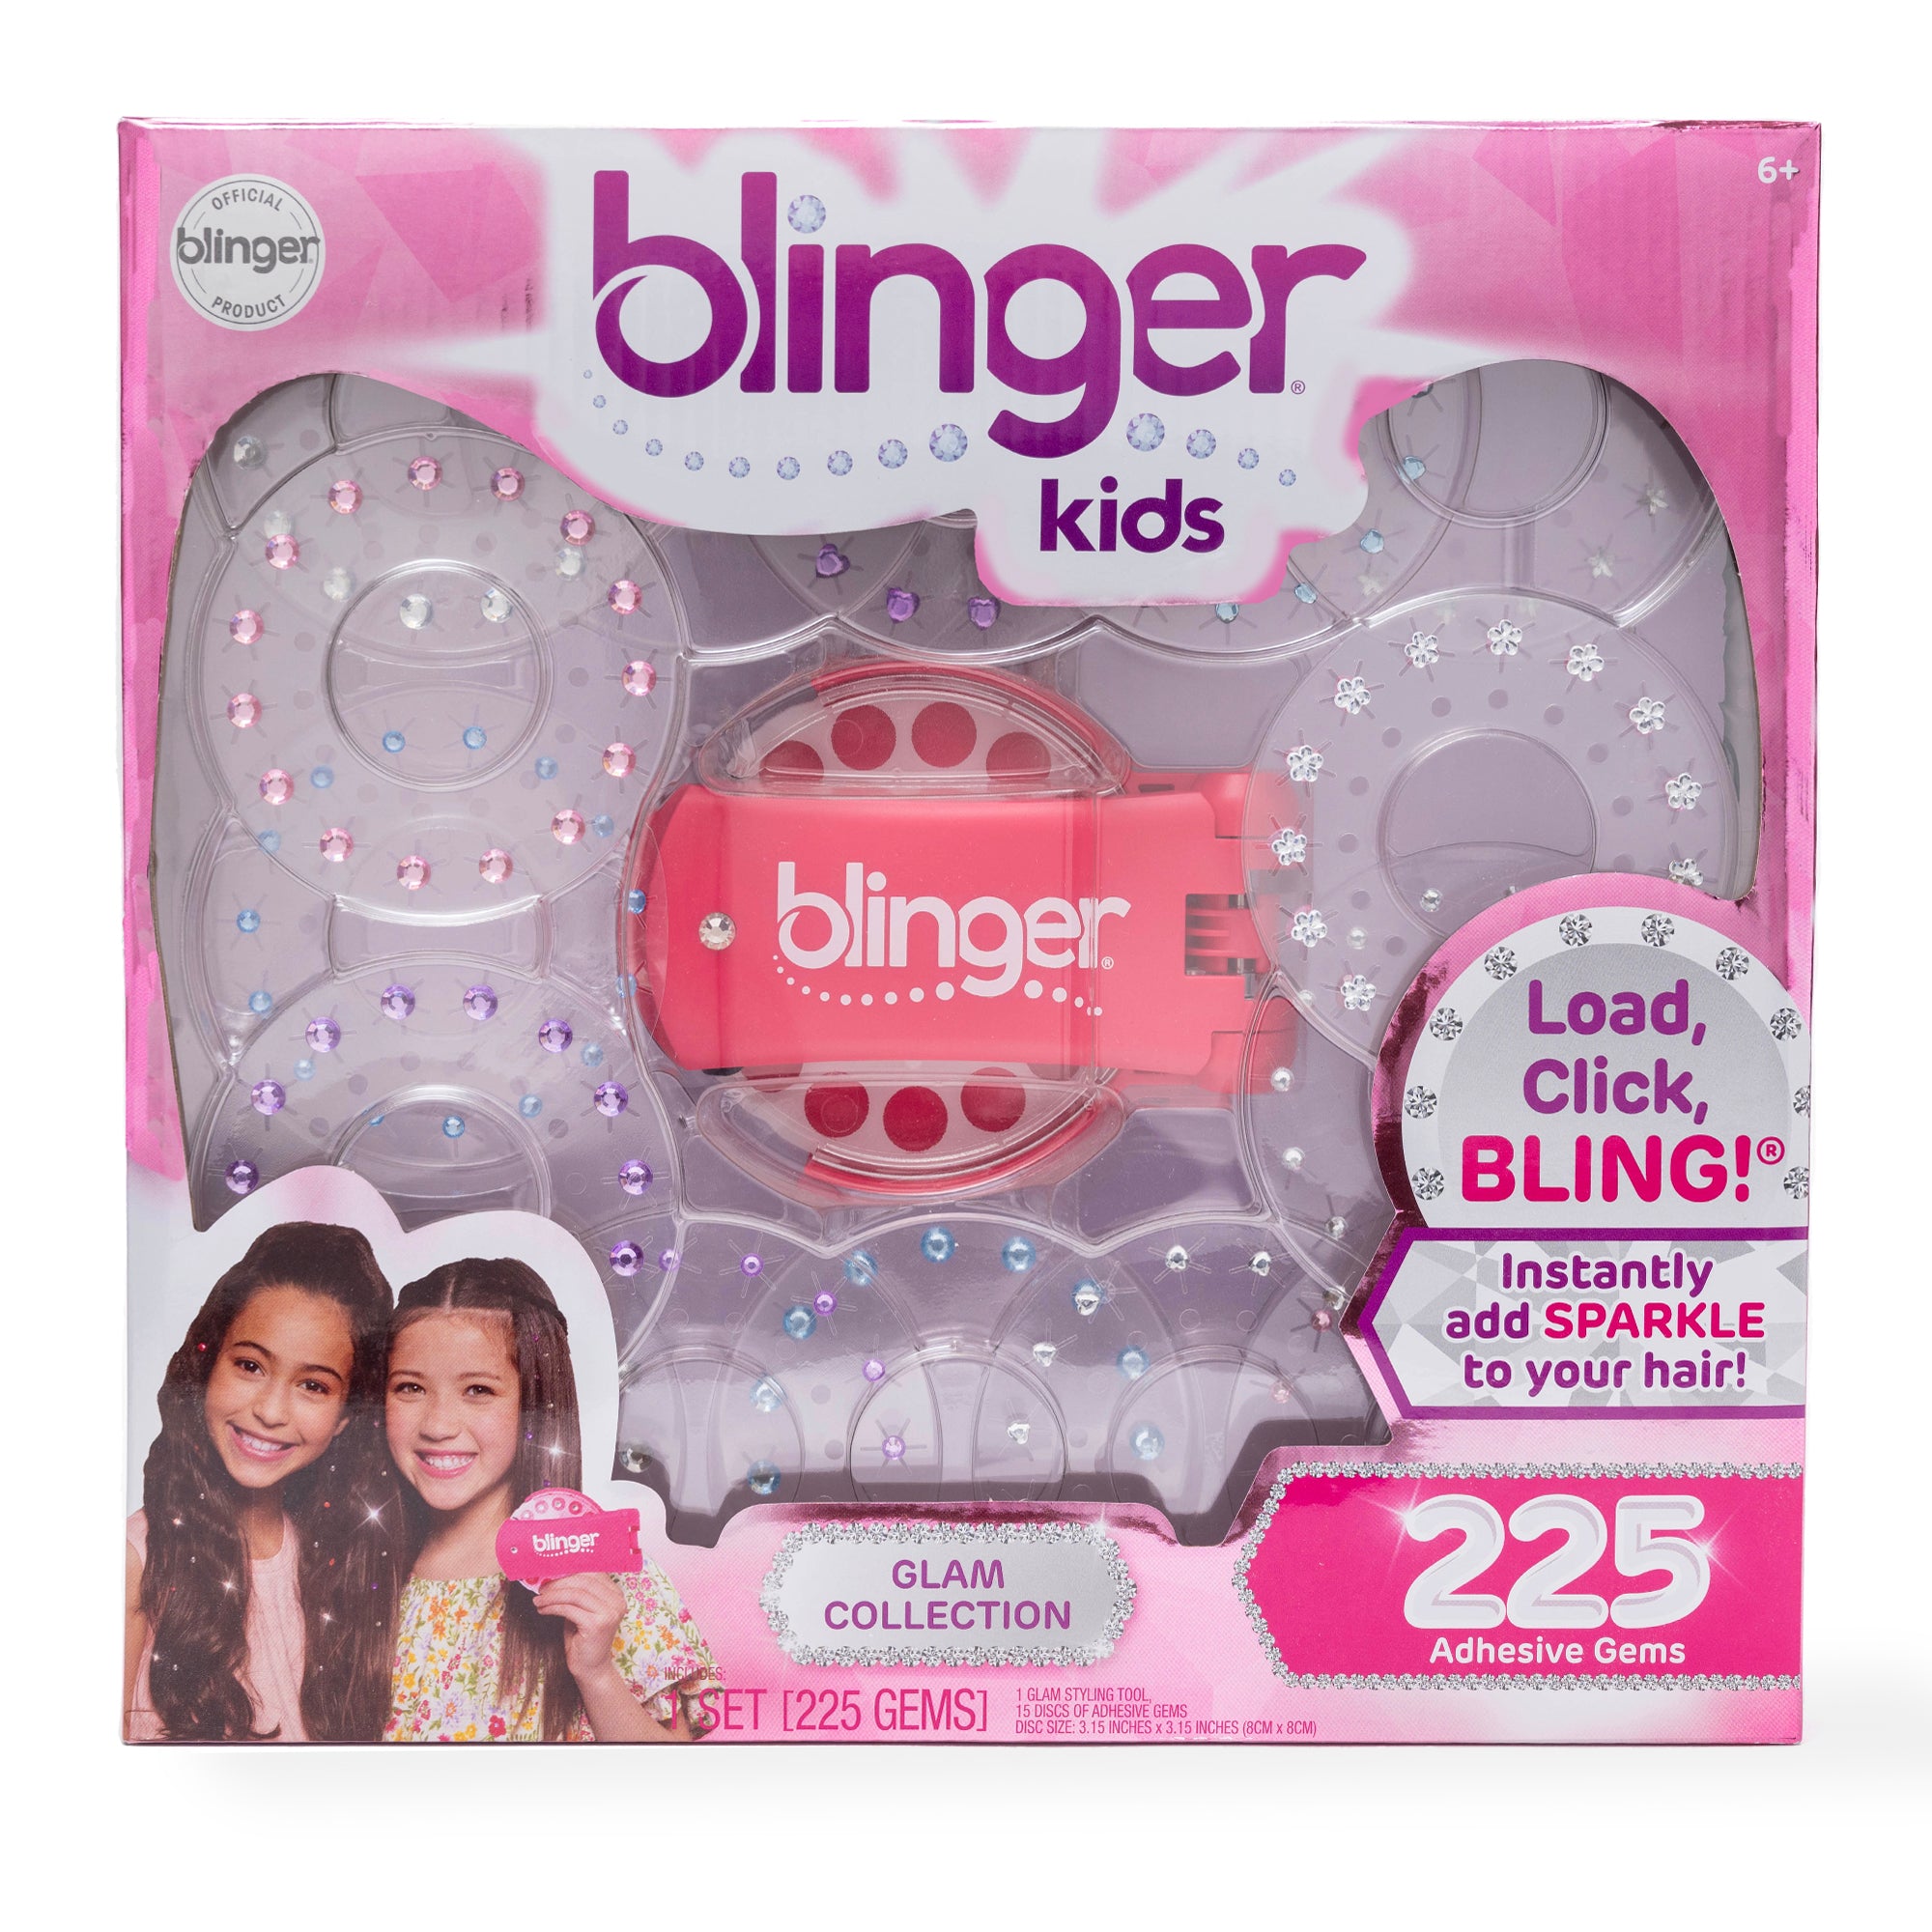 Blinger Starter Kit | Women's Hair Styling Tool + 75 precision-cut Glass Crystals | Bling Hair in Seconds! Bedazzling Multi-Faceted Gems | Hair-Safe